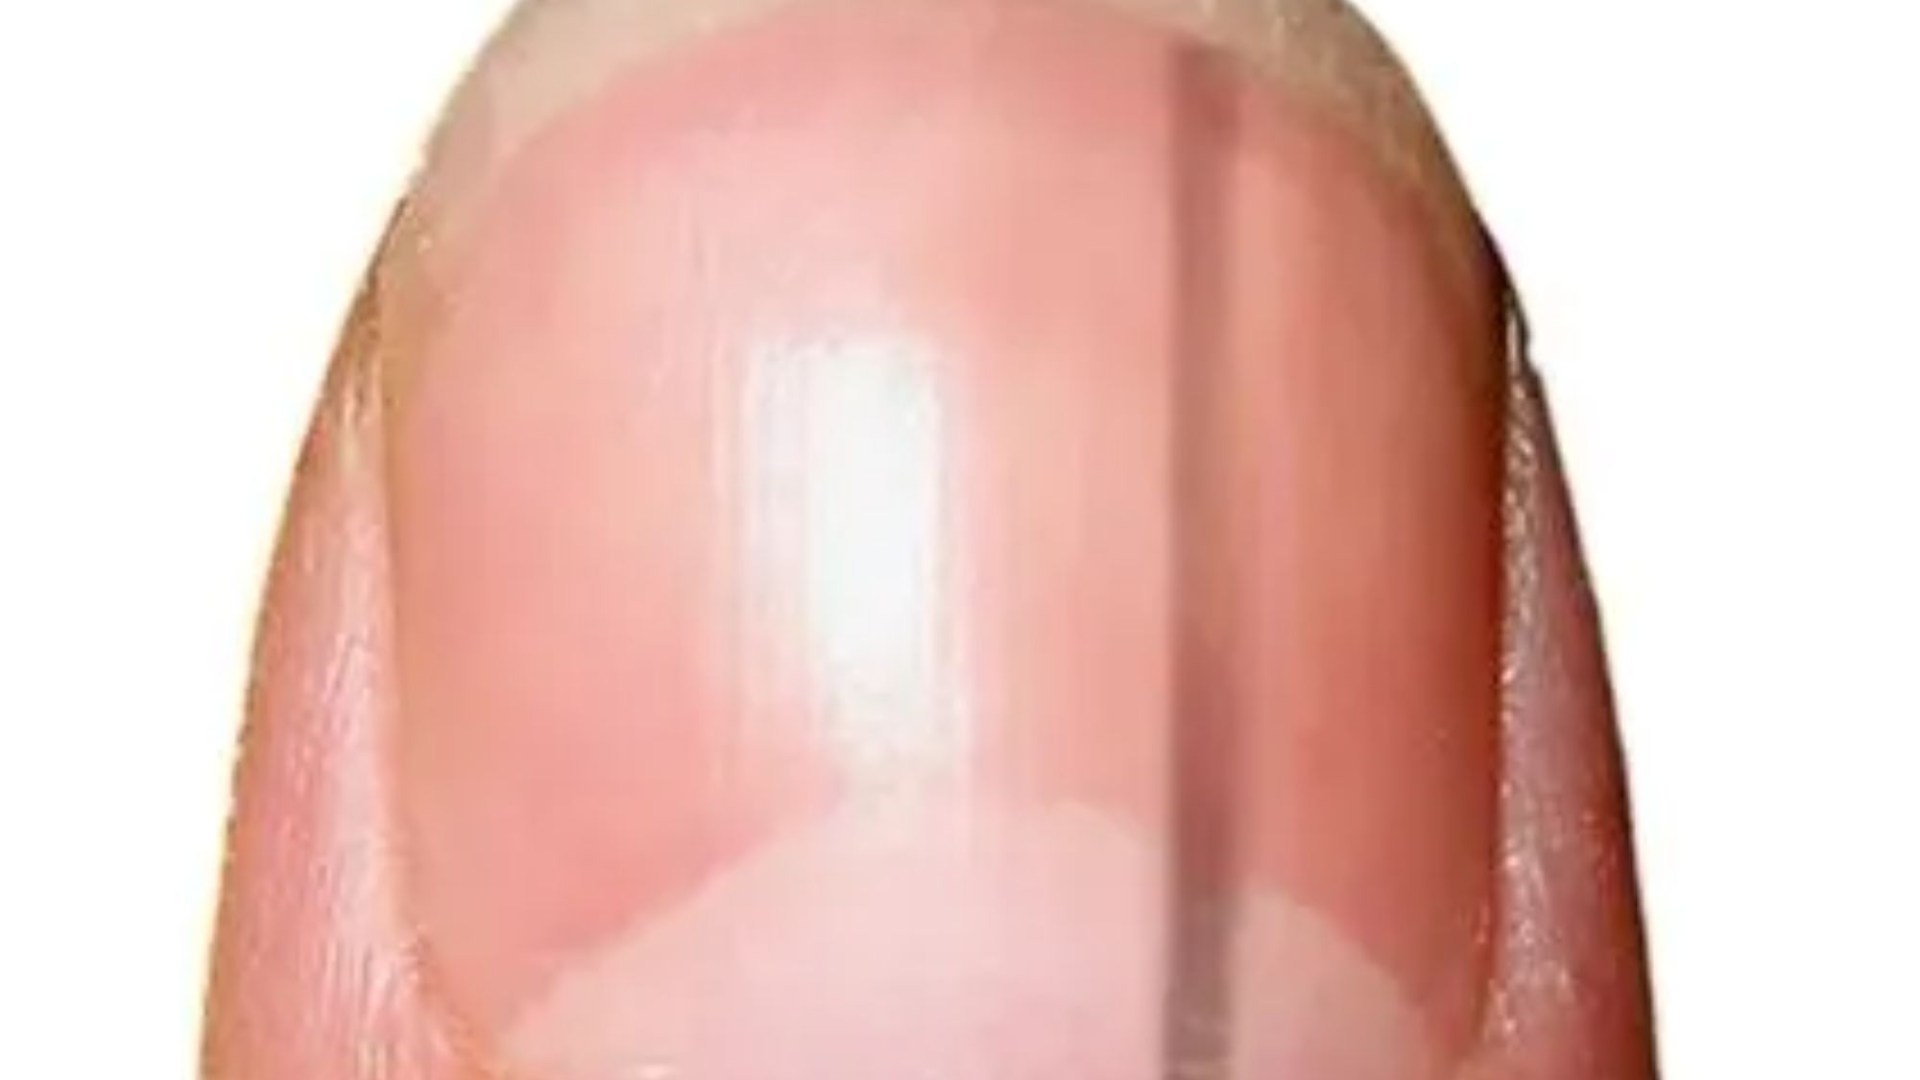 Horrifying time-lapse video shows how nail blemish can morph into killer stage 4 cancer